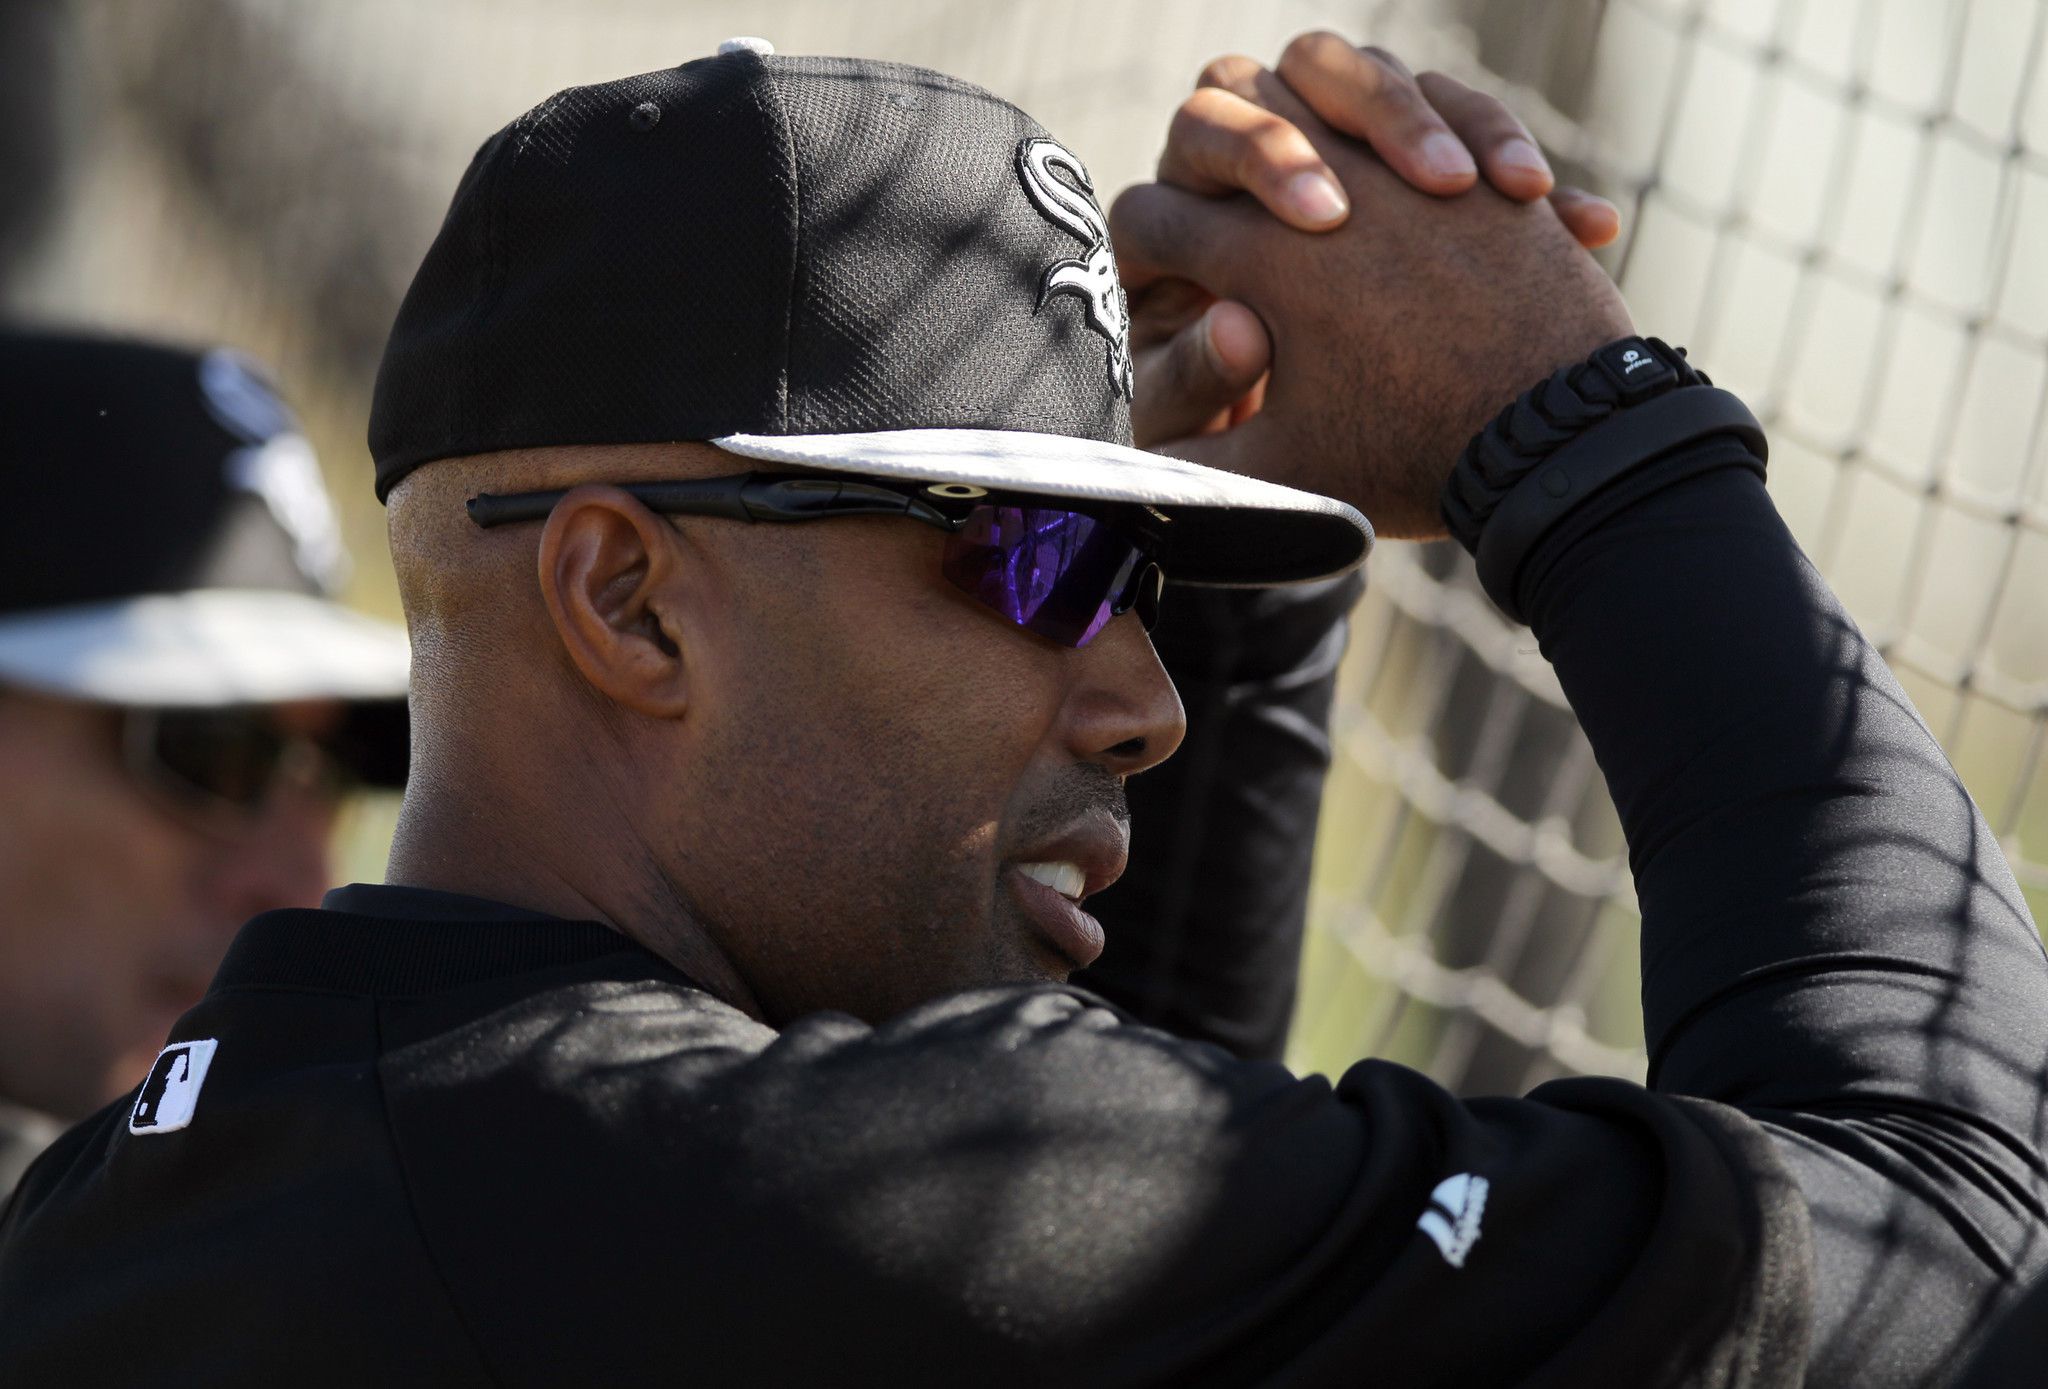 Harold Baines' election to Cooperstown leaves a lot of baseball